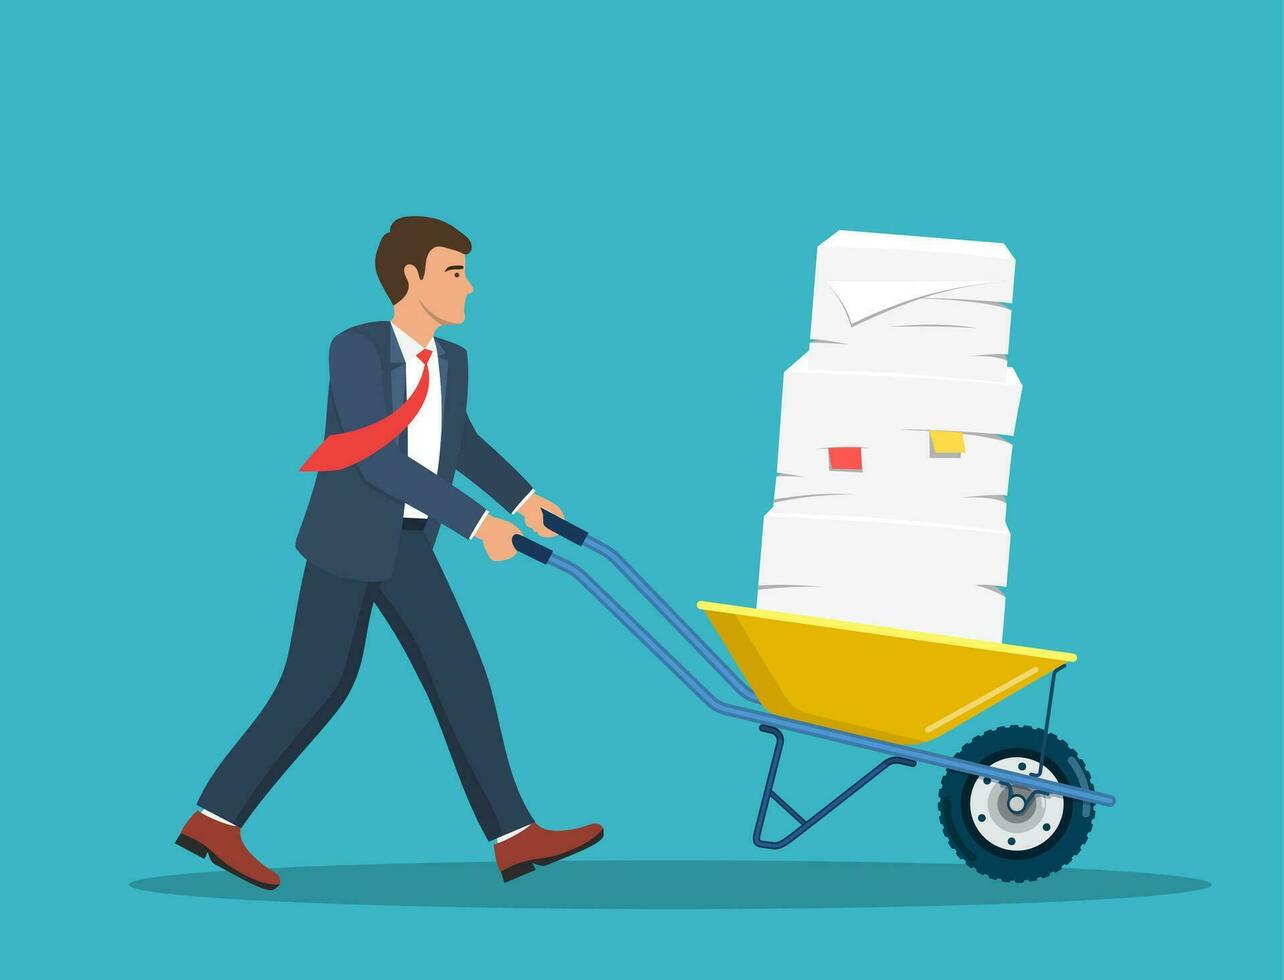 businessman pushing a wheelbarrow full of paper. Vector illustration in flat style